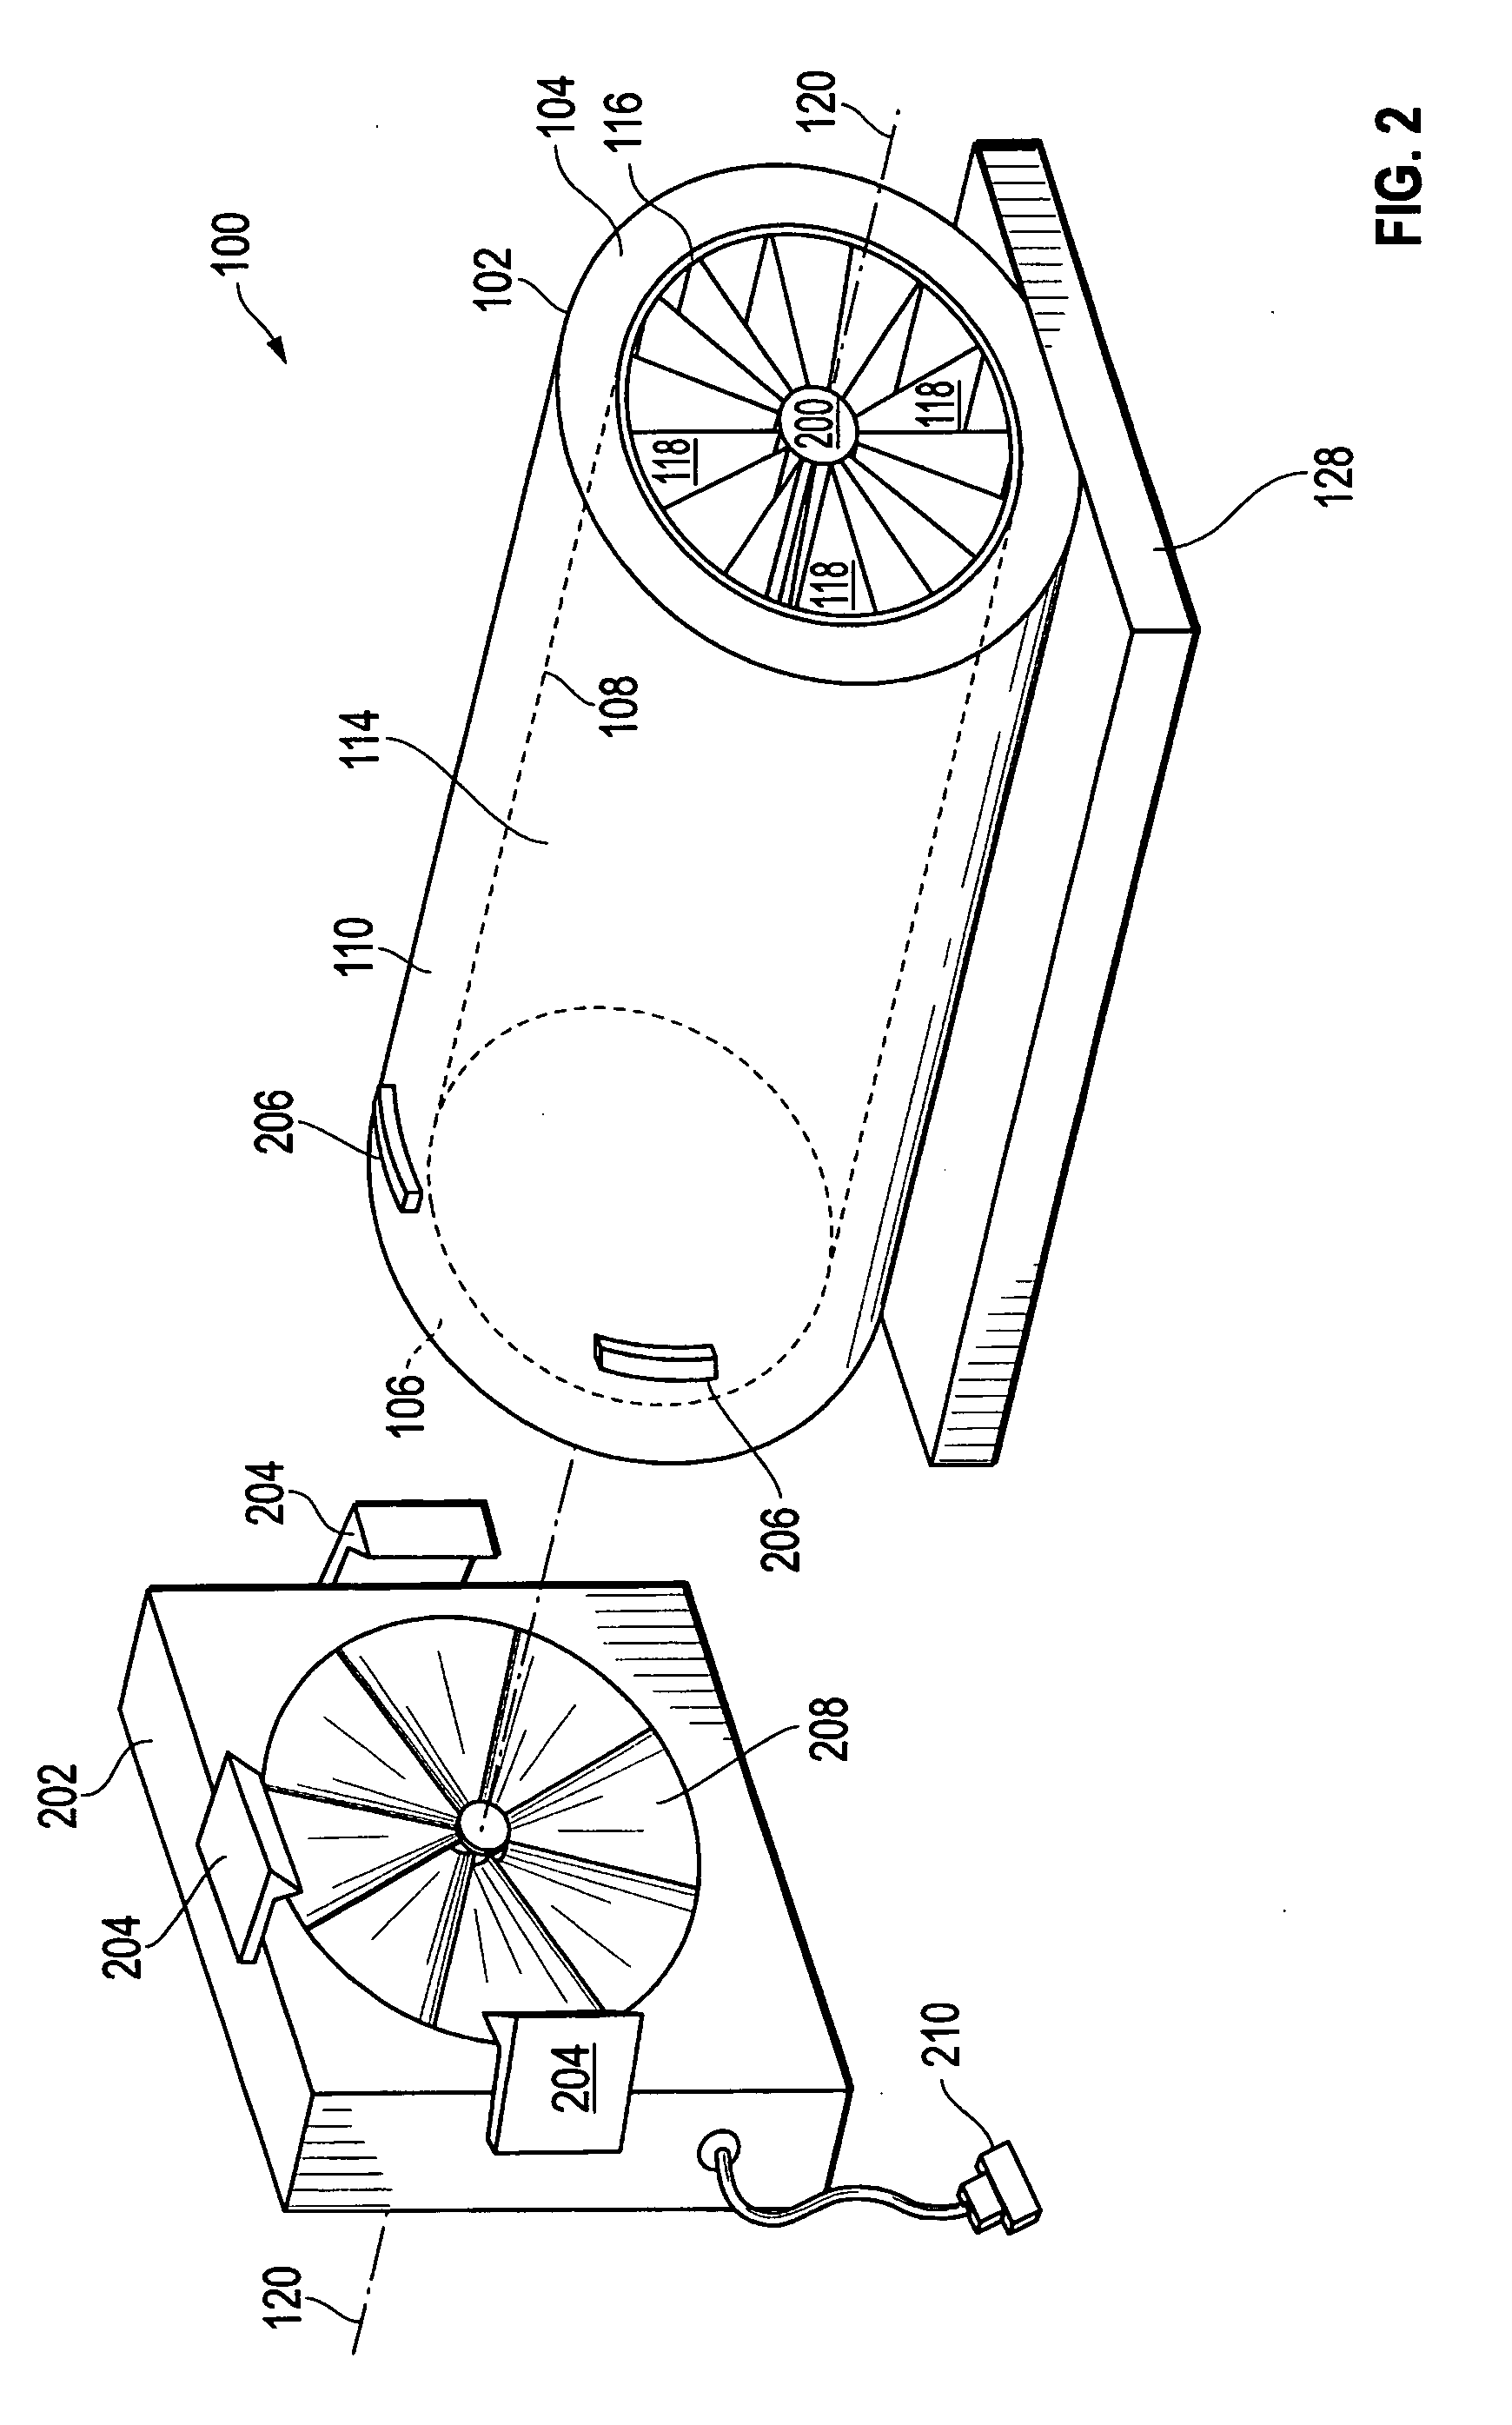 Heat sink for distributing a thermal load